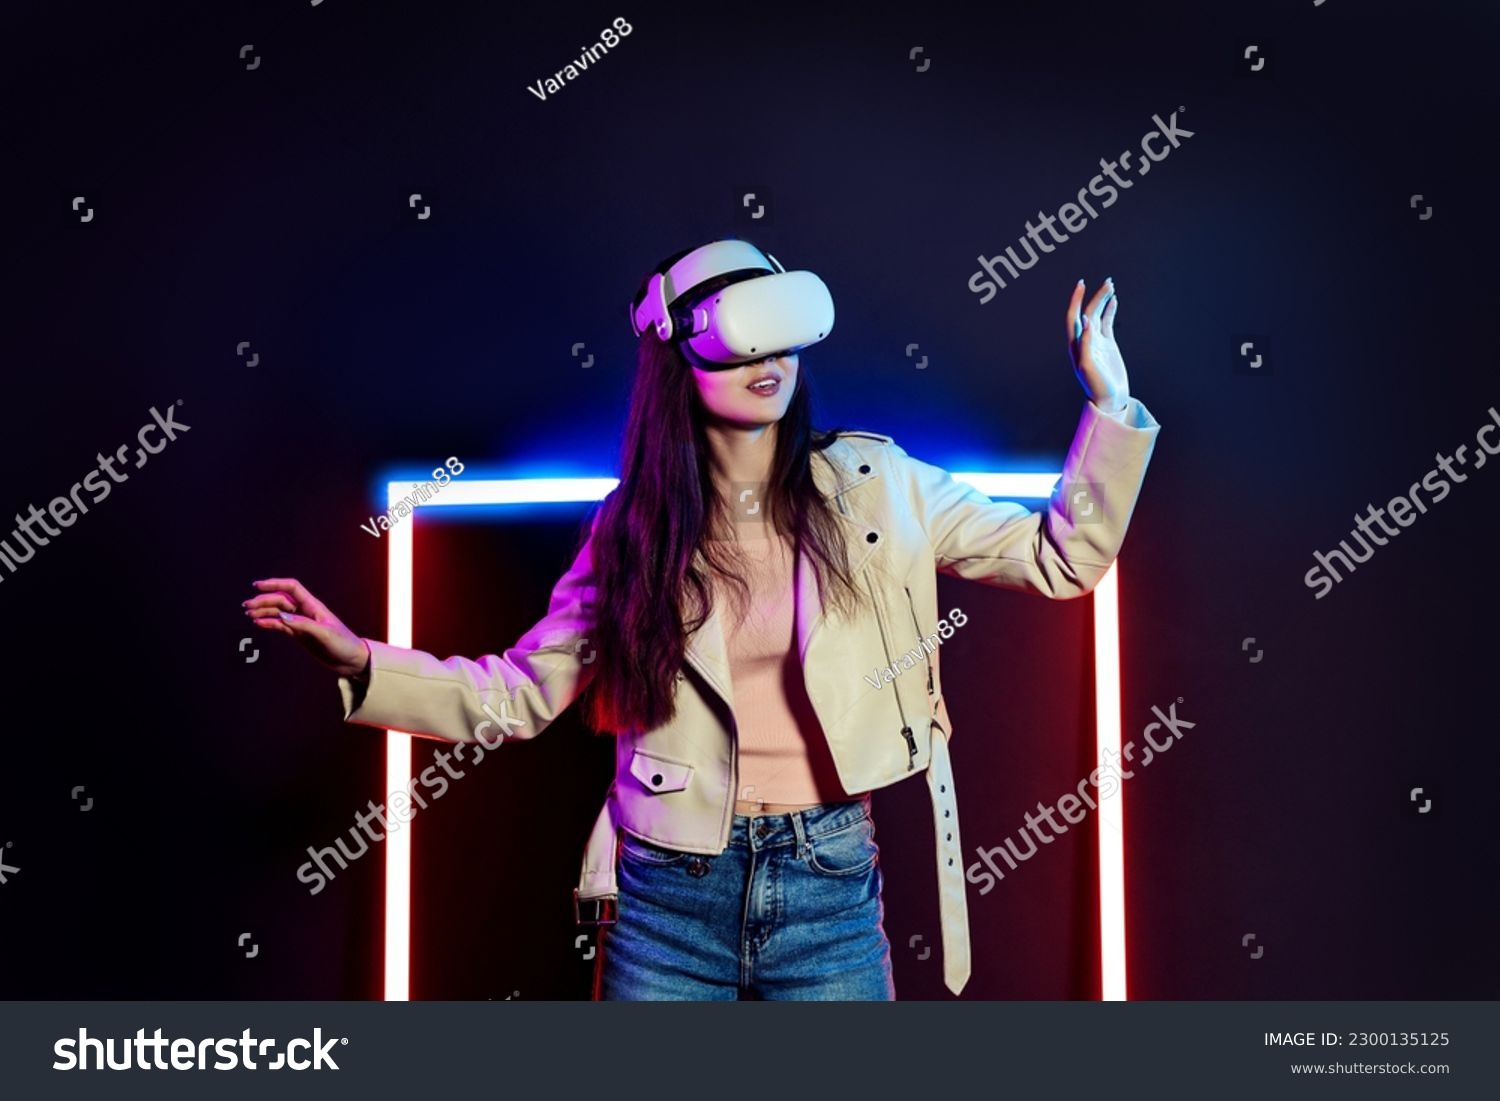 Exploring virtual reality world. Woman in vr headset goggles considers 3d space. #2300135125